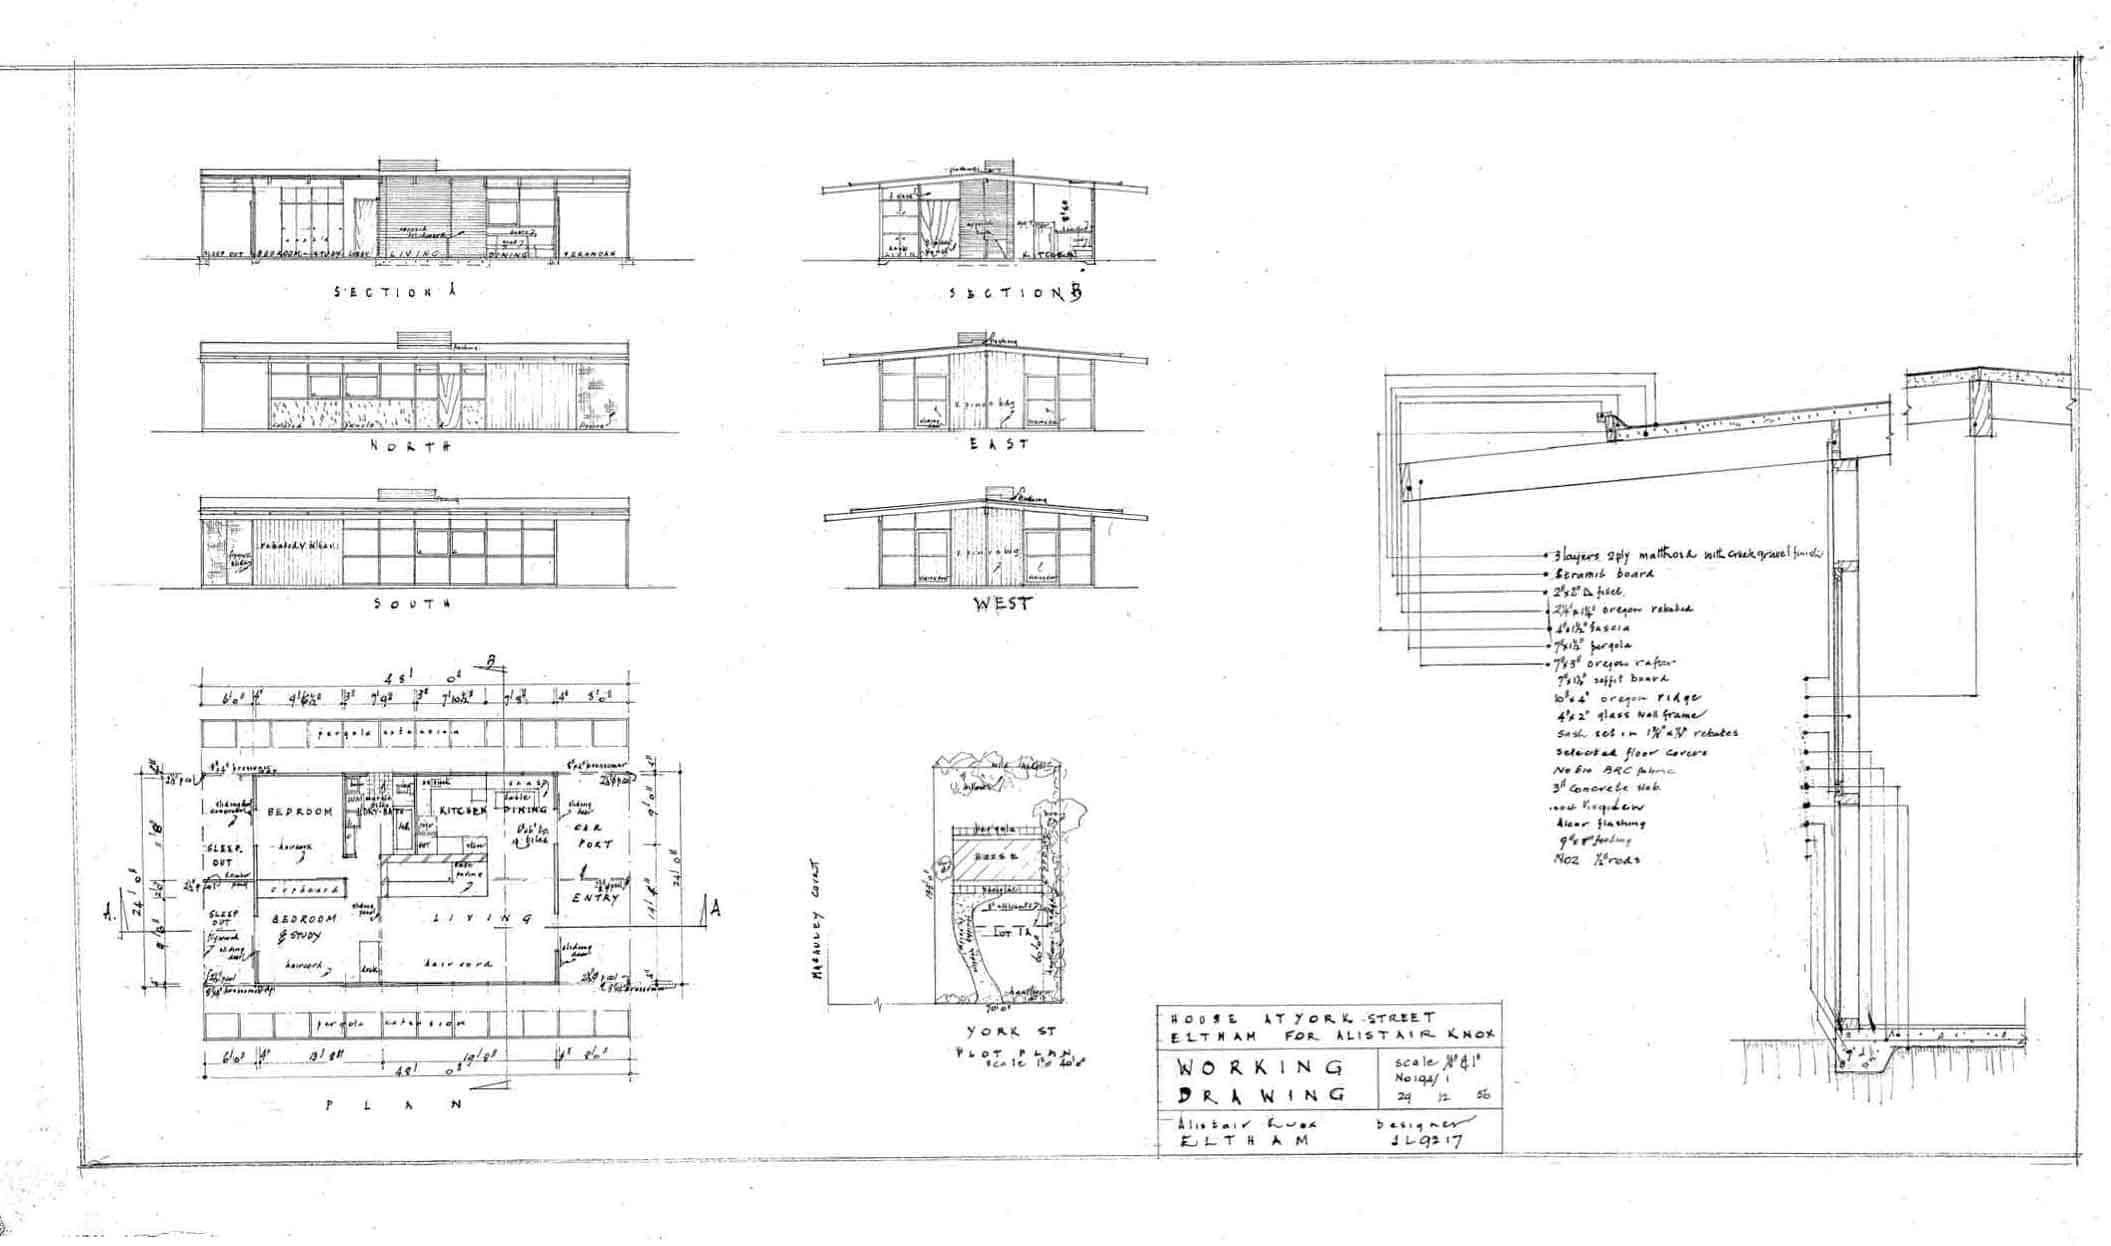 Prototype for the modular house, Knox house York St, Eltham Job number 194